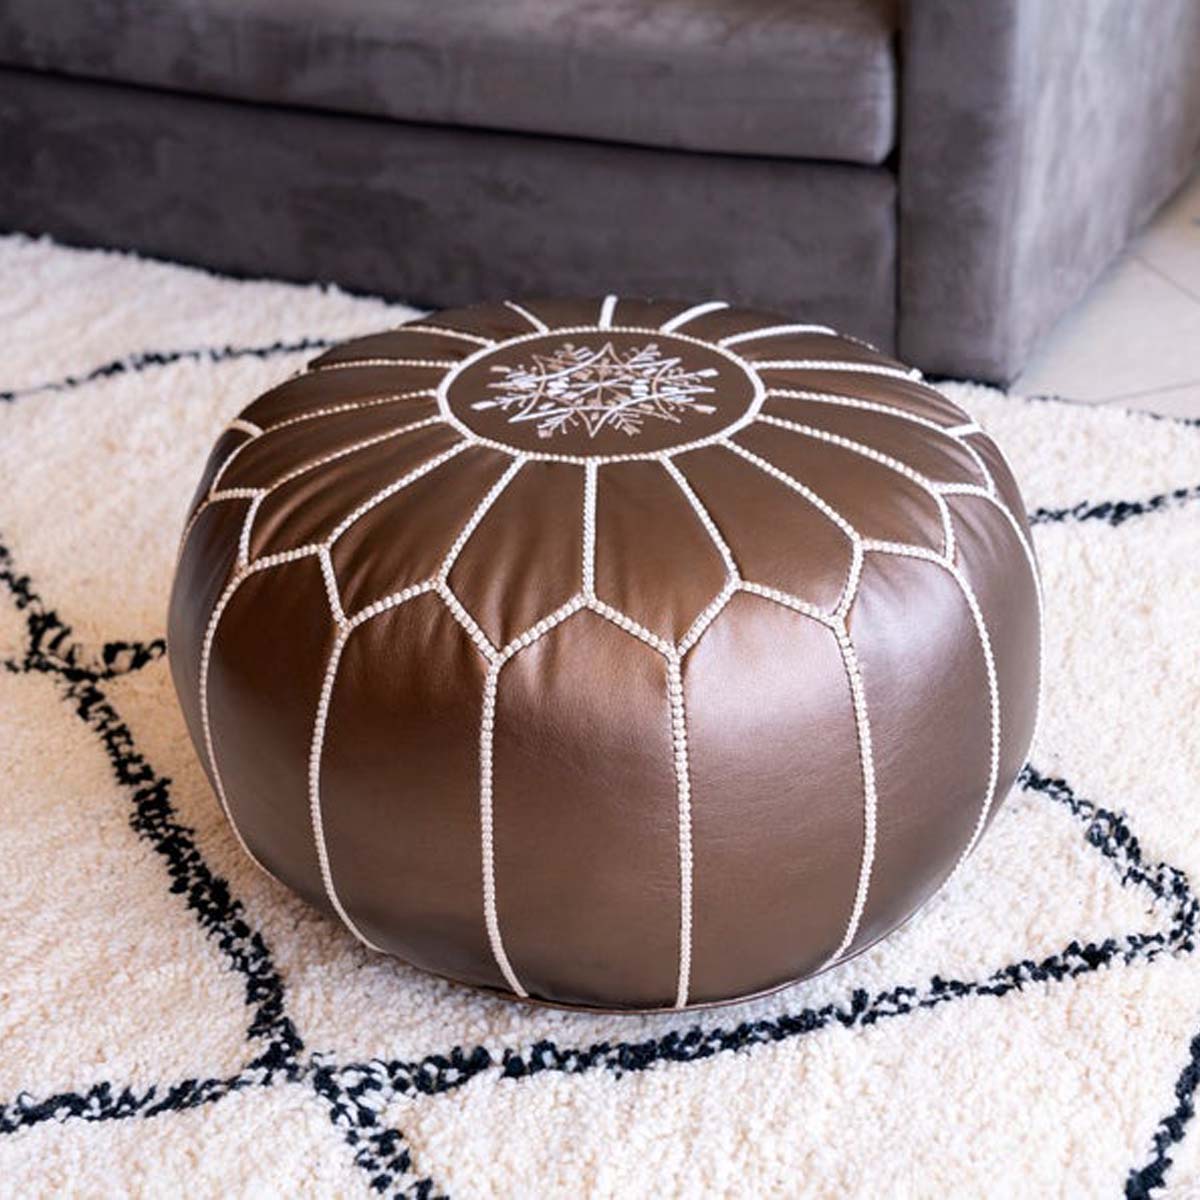 High Leather Quality Ottoman Set Of 2 Tan Moroccan Poufs Unfilled 